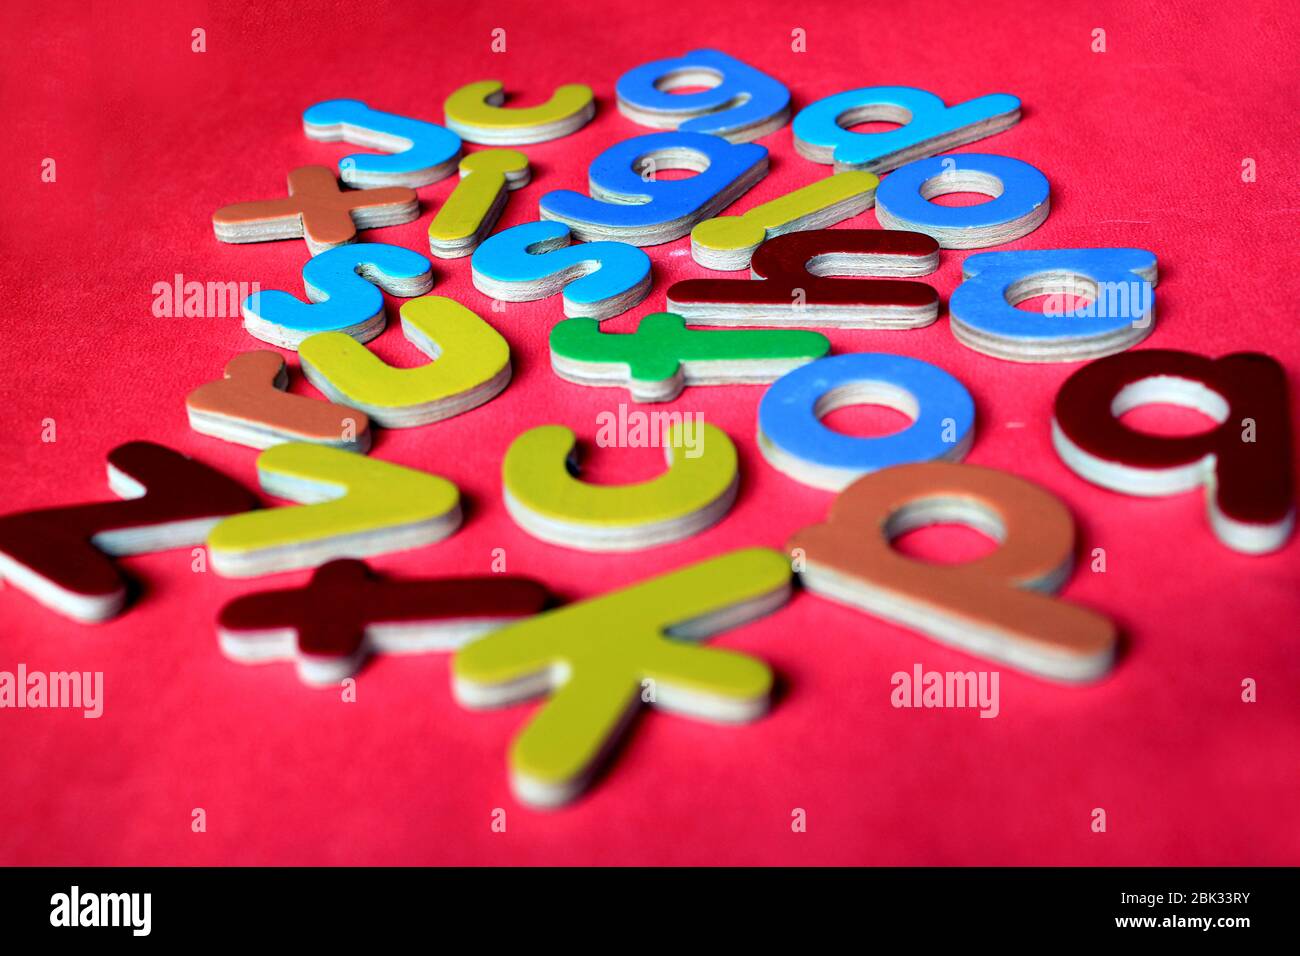 English Alphabets. Colorful wooden English small letters on a pink background. Stock Photo